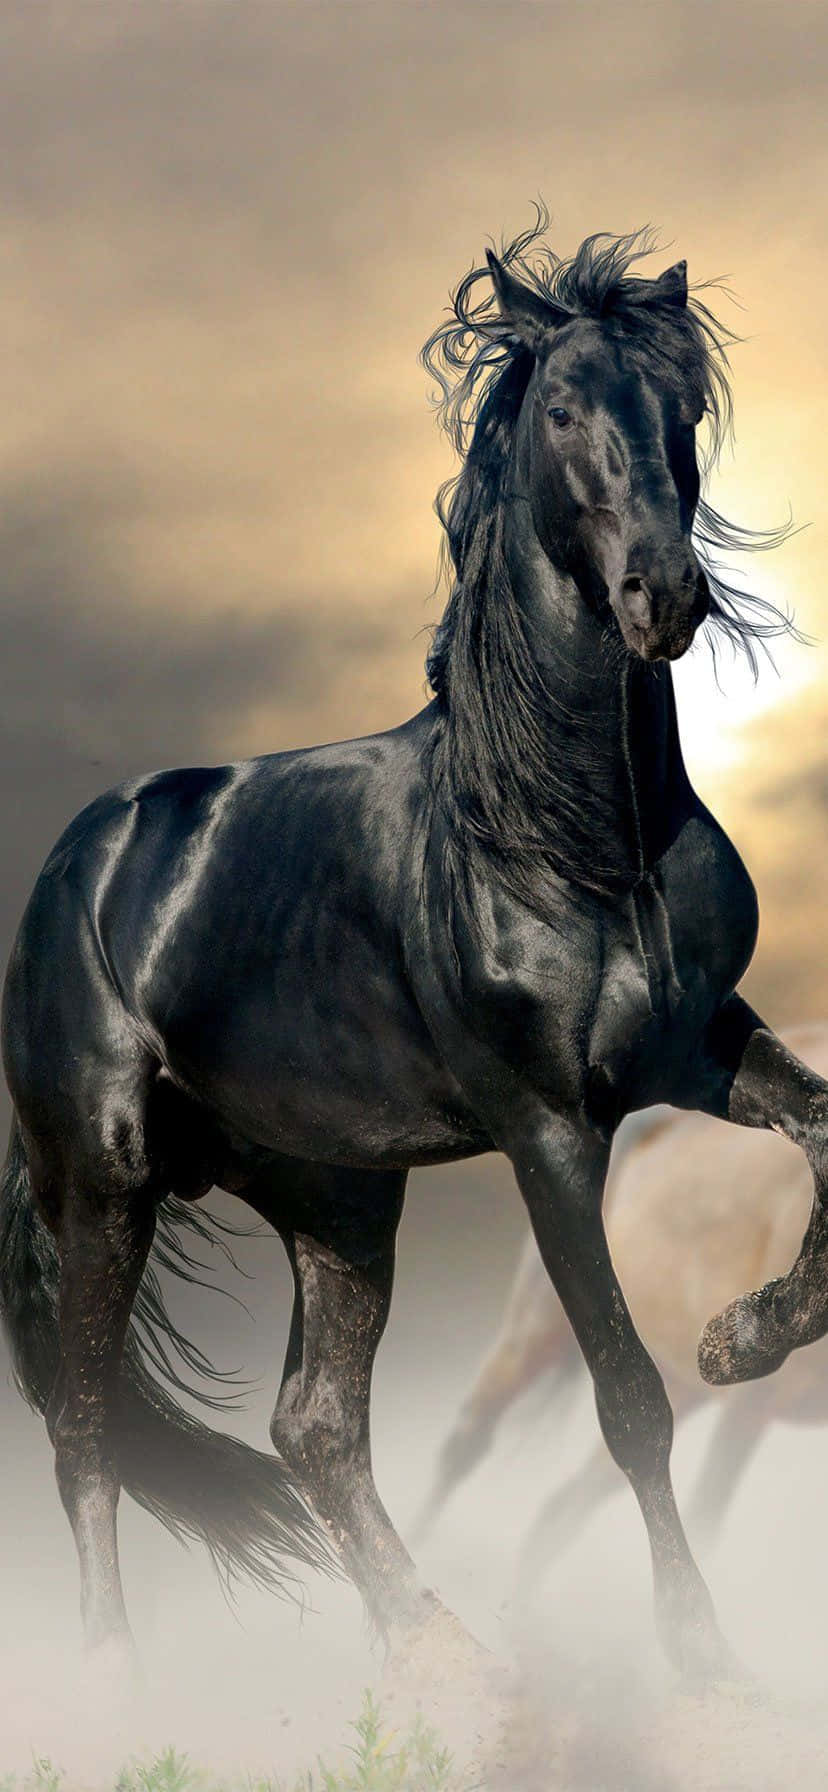 "A beautiful horse stands still and proud against a setting sun." Wallpaper